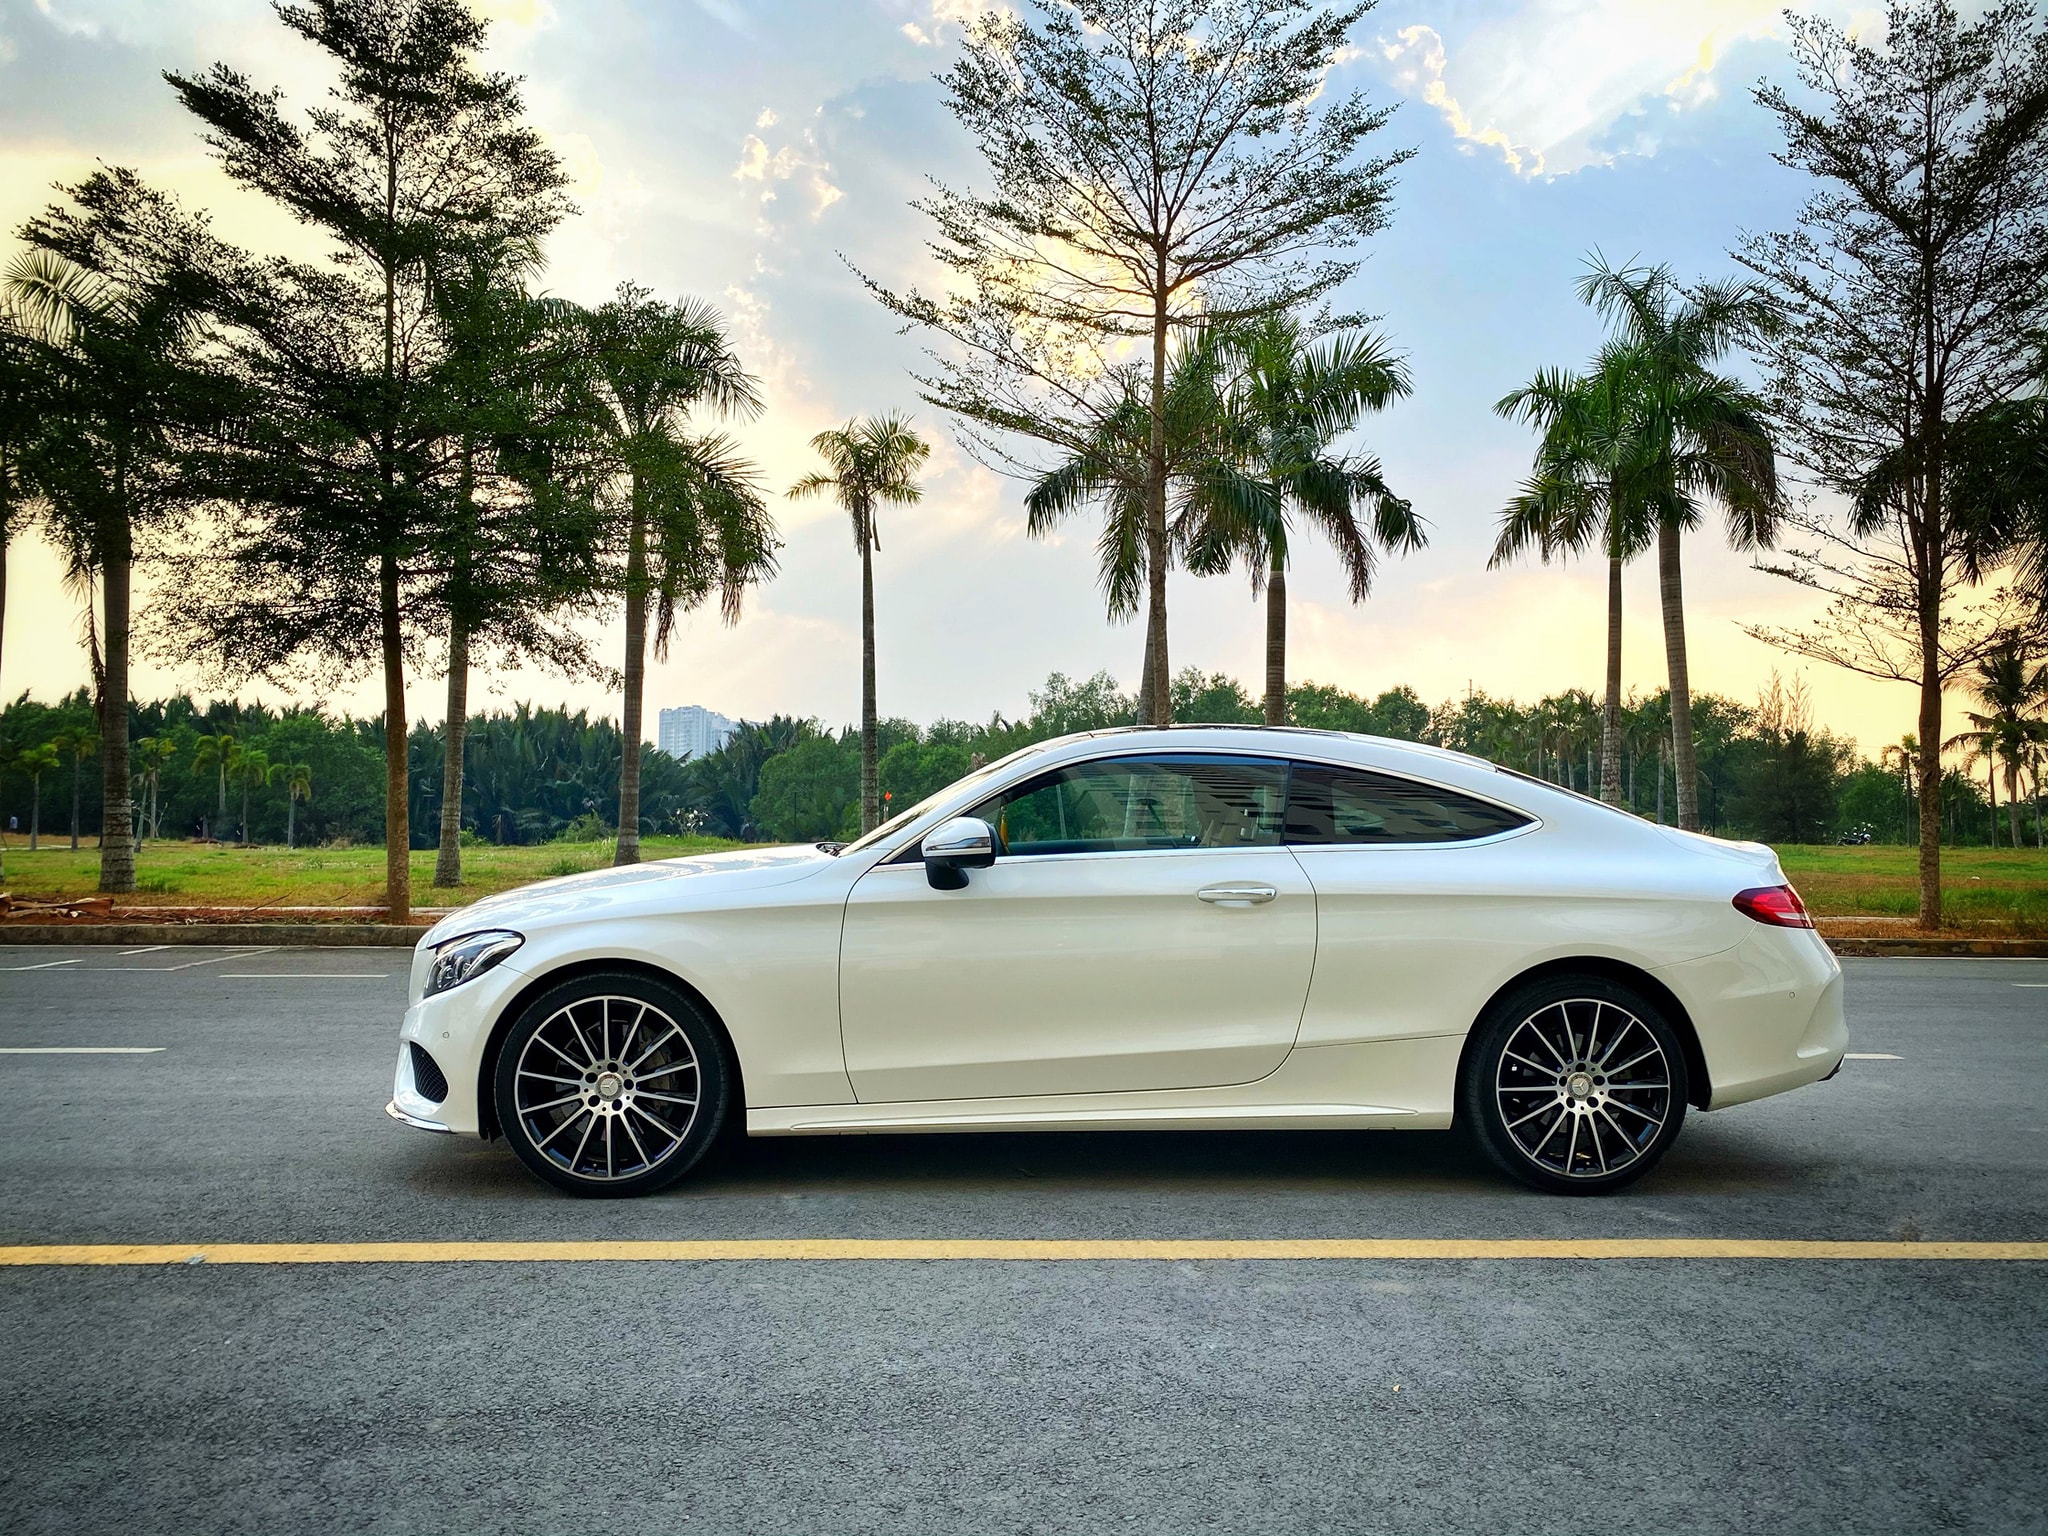 Tested 2022 MercedesBenz C300 4Matic Is One for Traditionalists